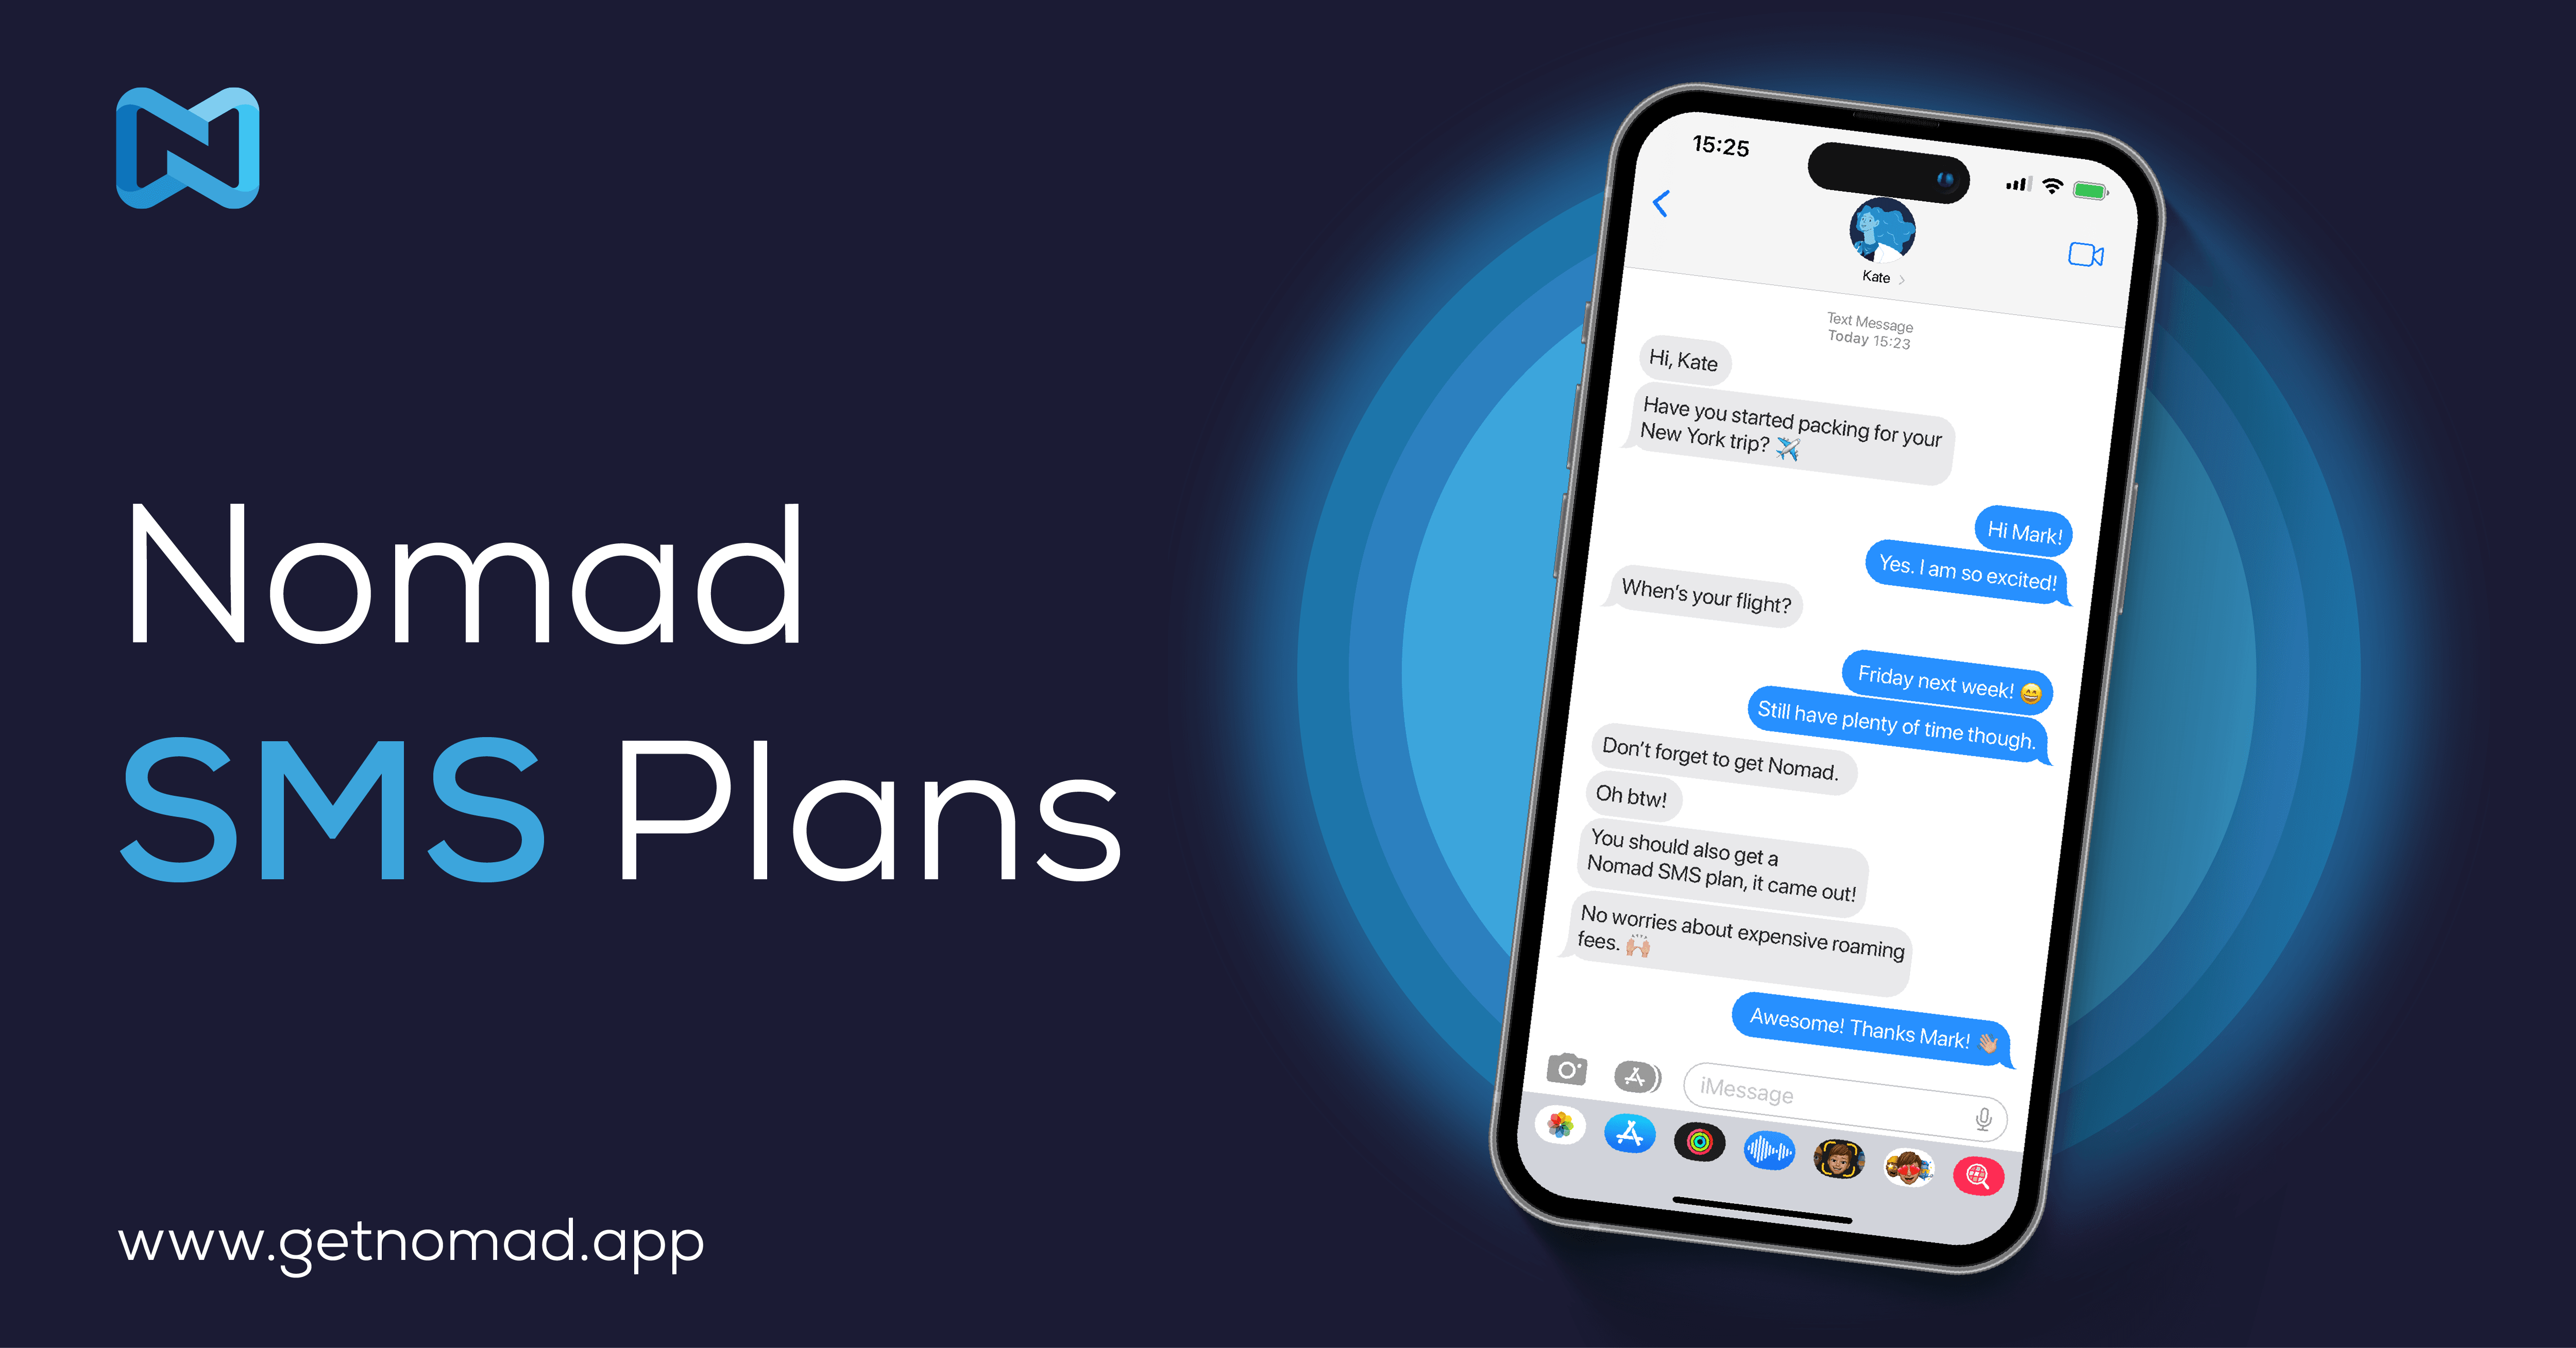 Nomad SMS Plans are currently available for the USA, Canada and UK.